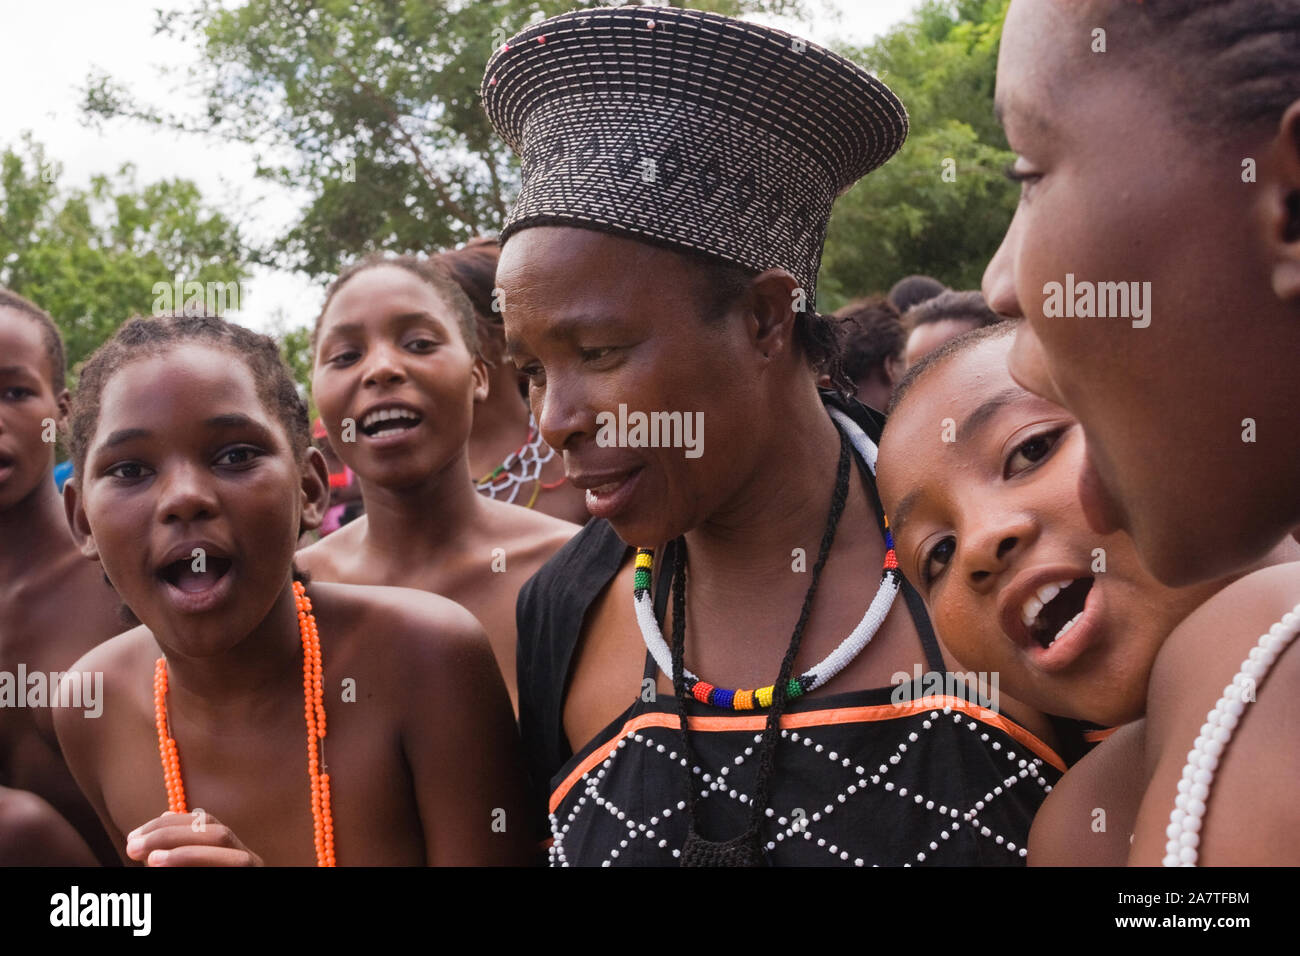 Zulu Girls High Resolution Stock Photography And Images Alamy The latest tweets from alamy (@alamy). https www alamy com zulu woman with traditional isicholo headdress that indicates she is married the headdress is woven into geometric patterns image331838520 html